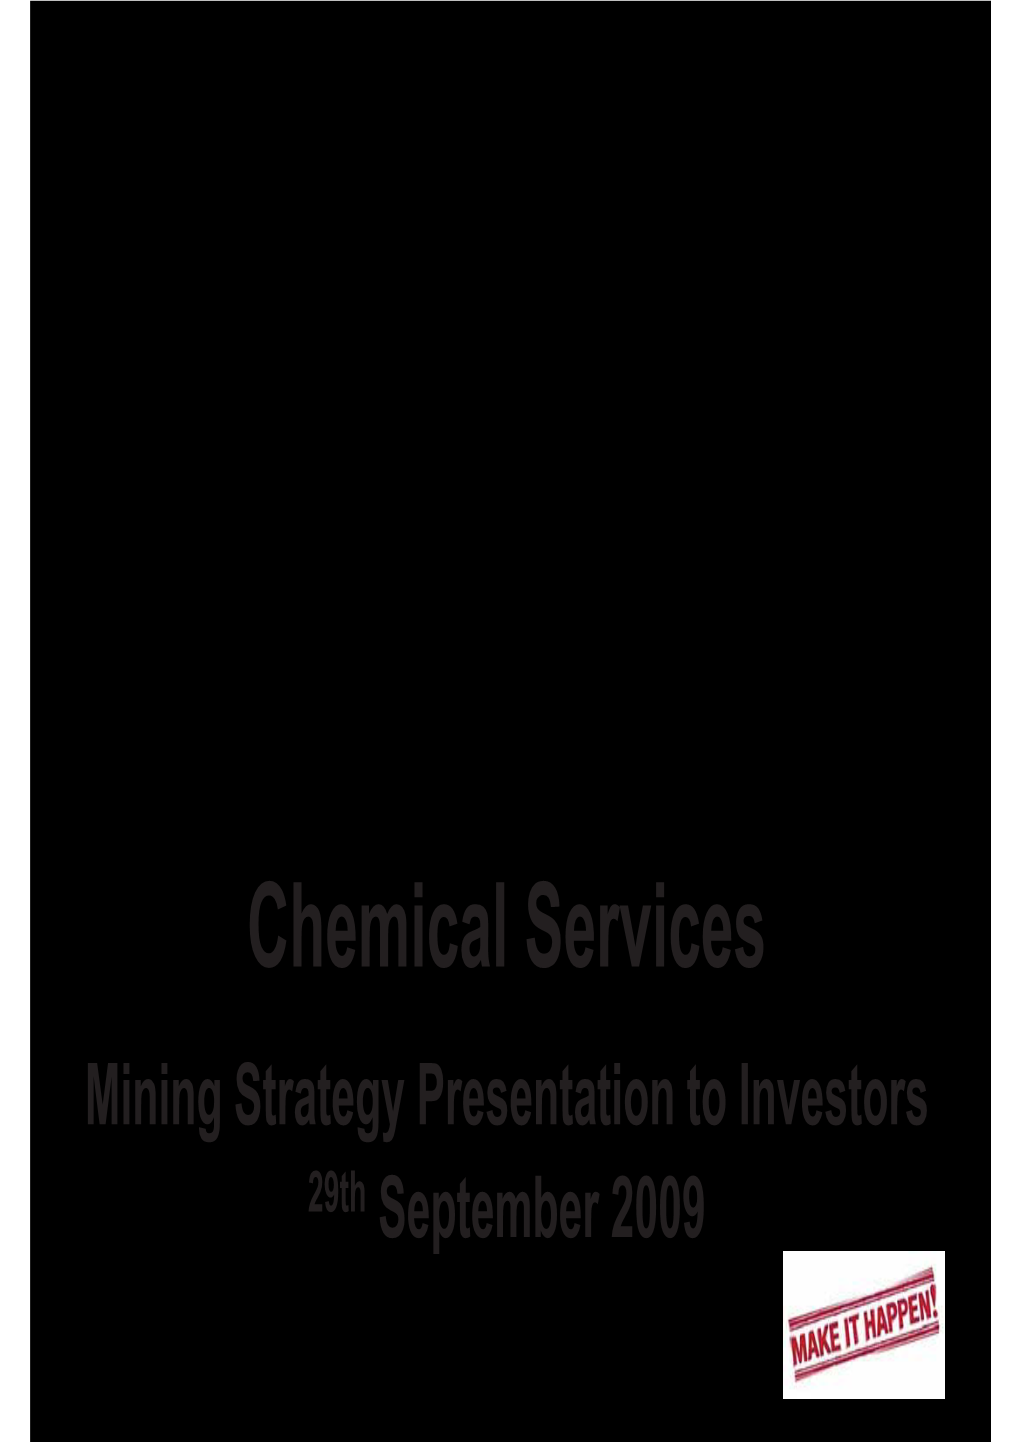 29 September Chemserve's Mining Chemicals Strategy